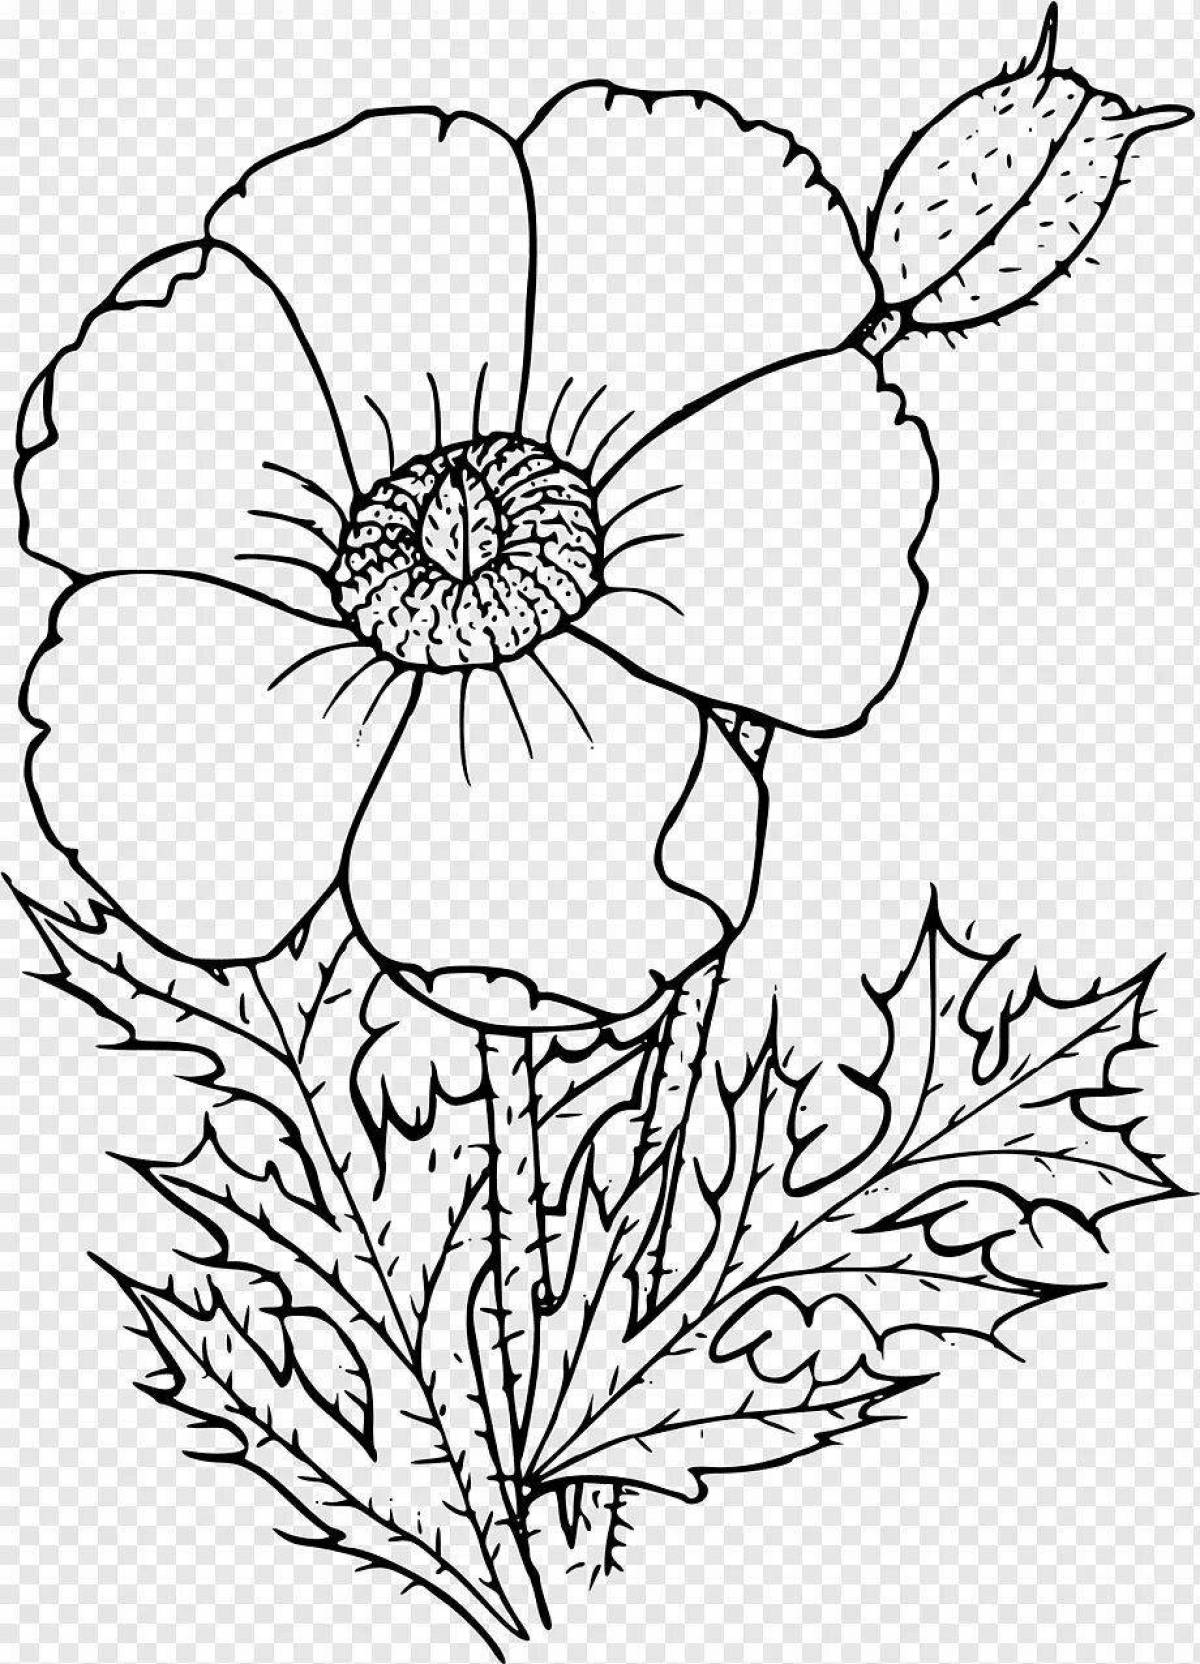 Coloring book glowing poppy flower